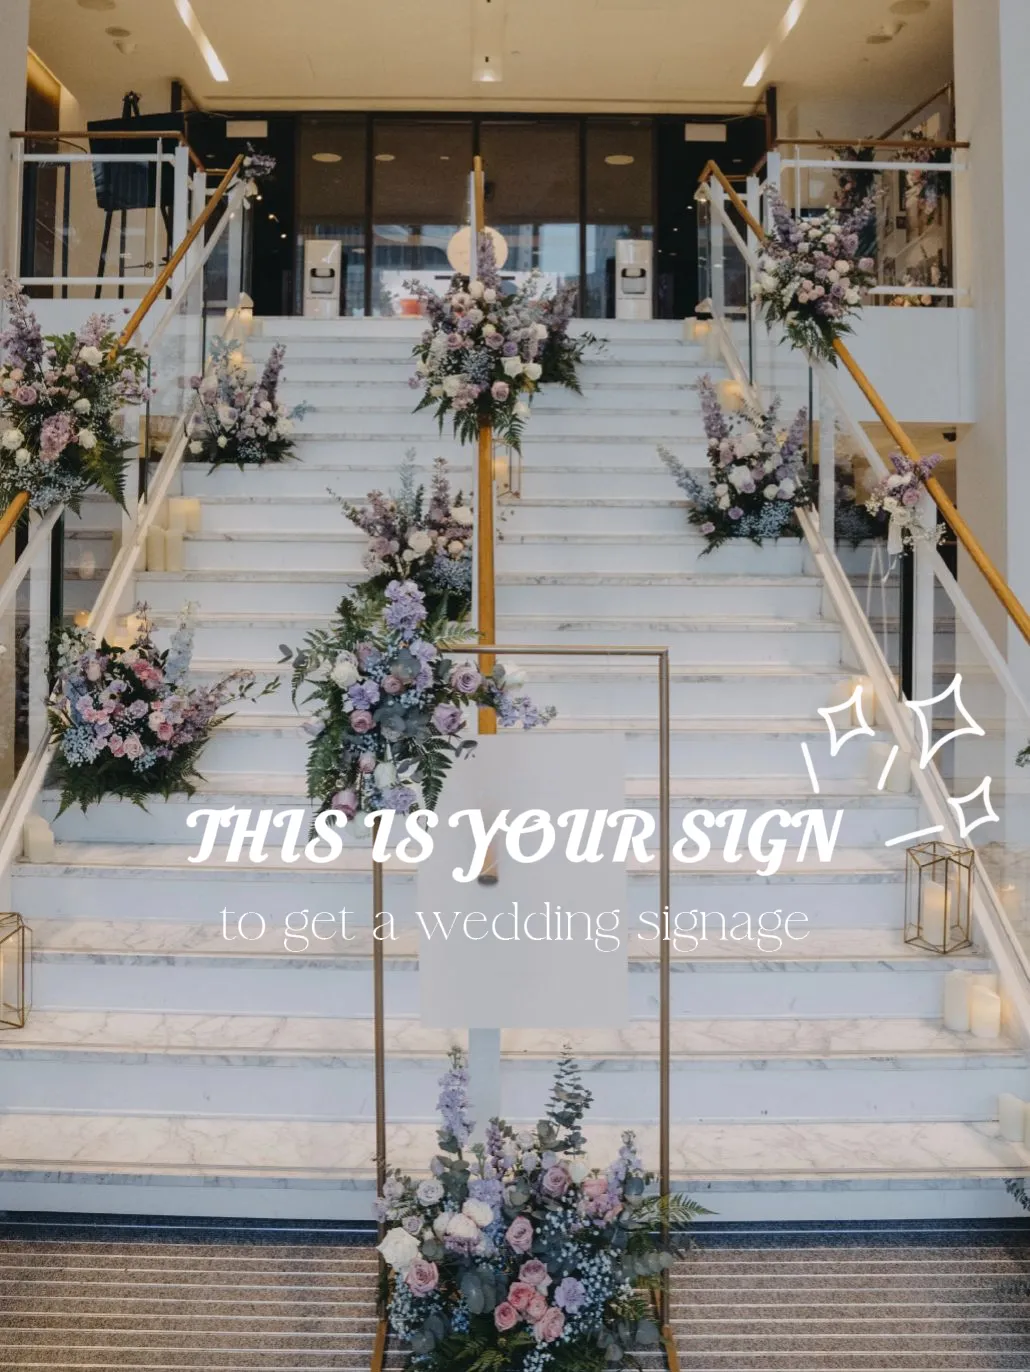 THIS IS YOUR SIGN TO GET A WEDDING SIGNAGE's images